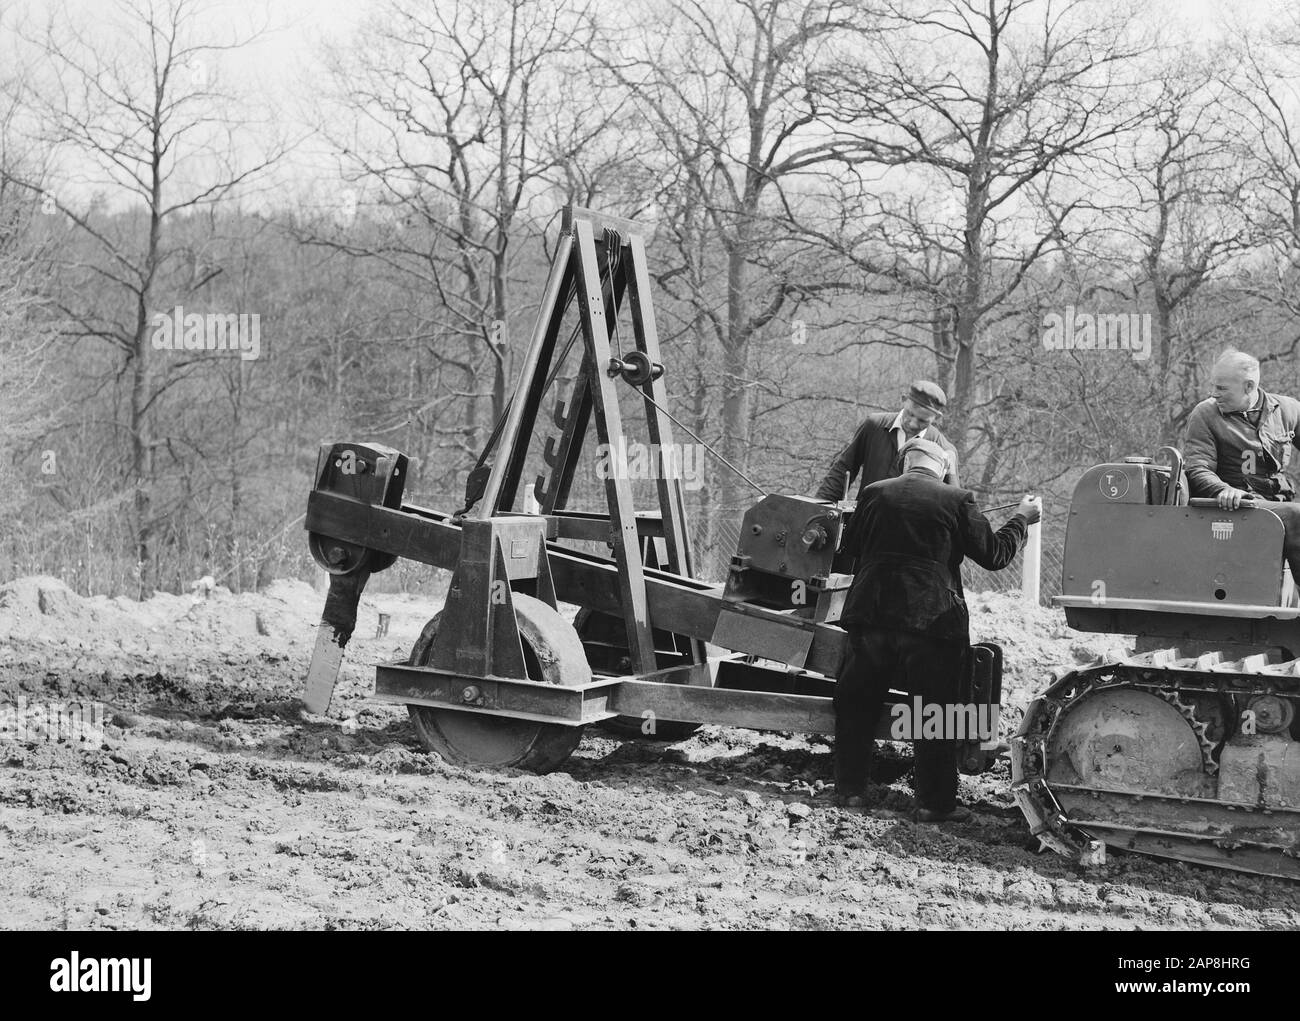 Construction of swimming pool and sports complex Beekhuizen Date: april 1953 Location: Beekhuizen, Gelderland, Velp Keywords: workers, sconces, leveling, groundworking, ground turbulents, mining Stock Photo